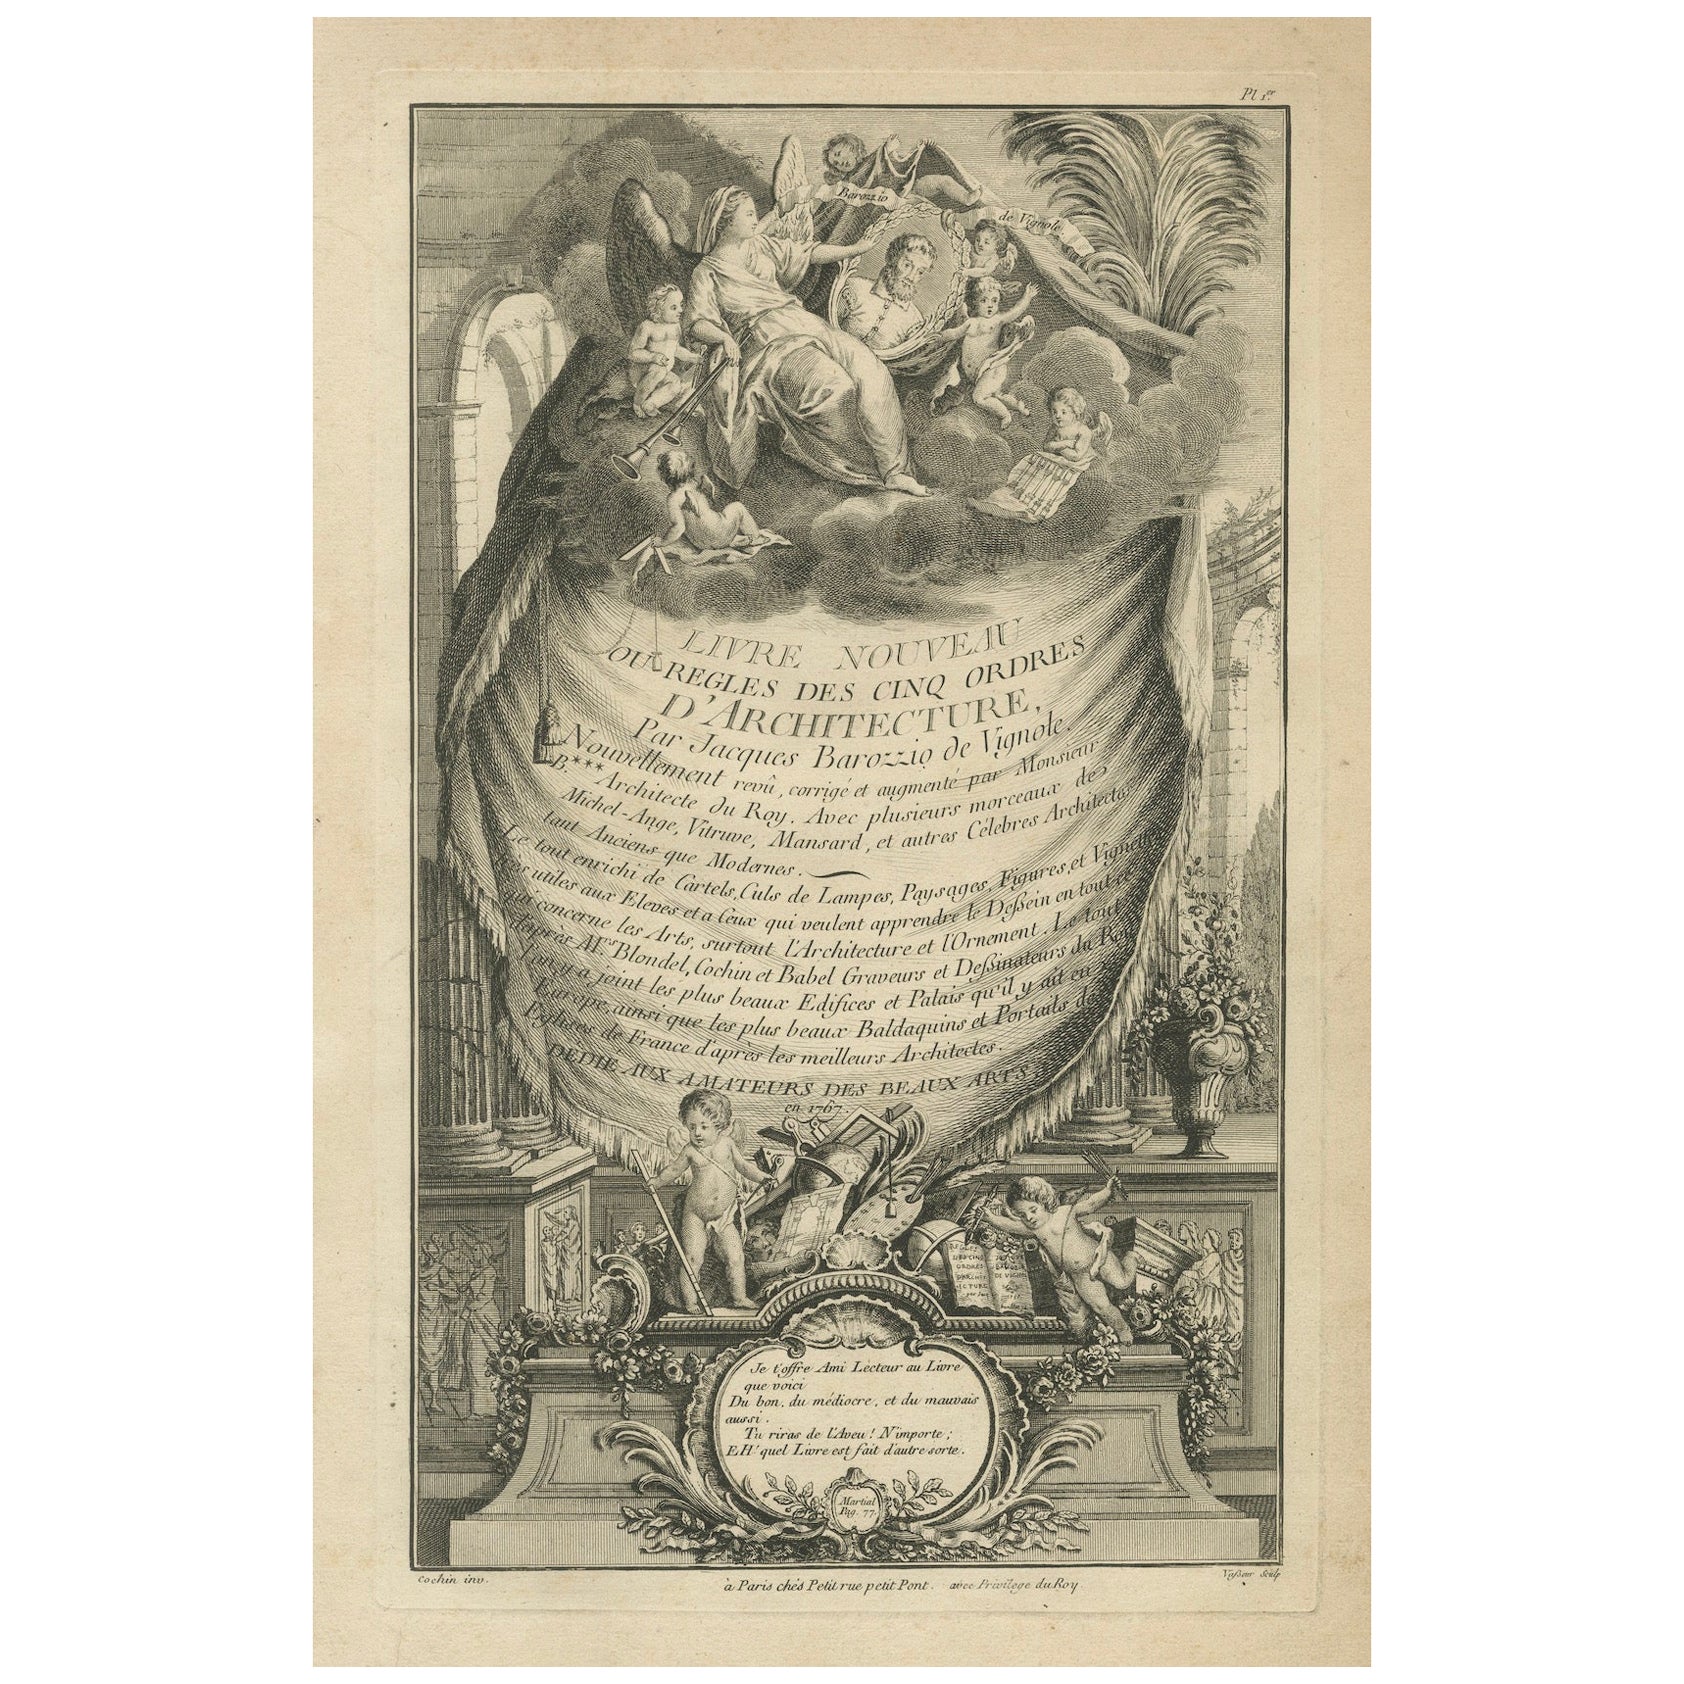 Renaissance Architectural Orders by Vignola's Frontispiece, 1767